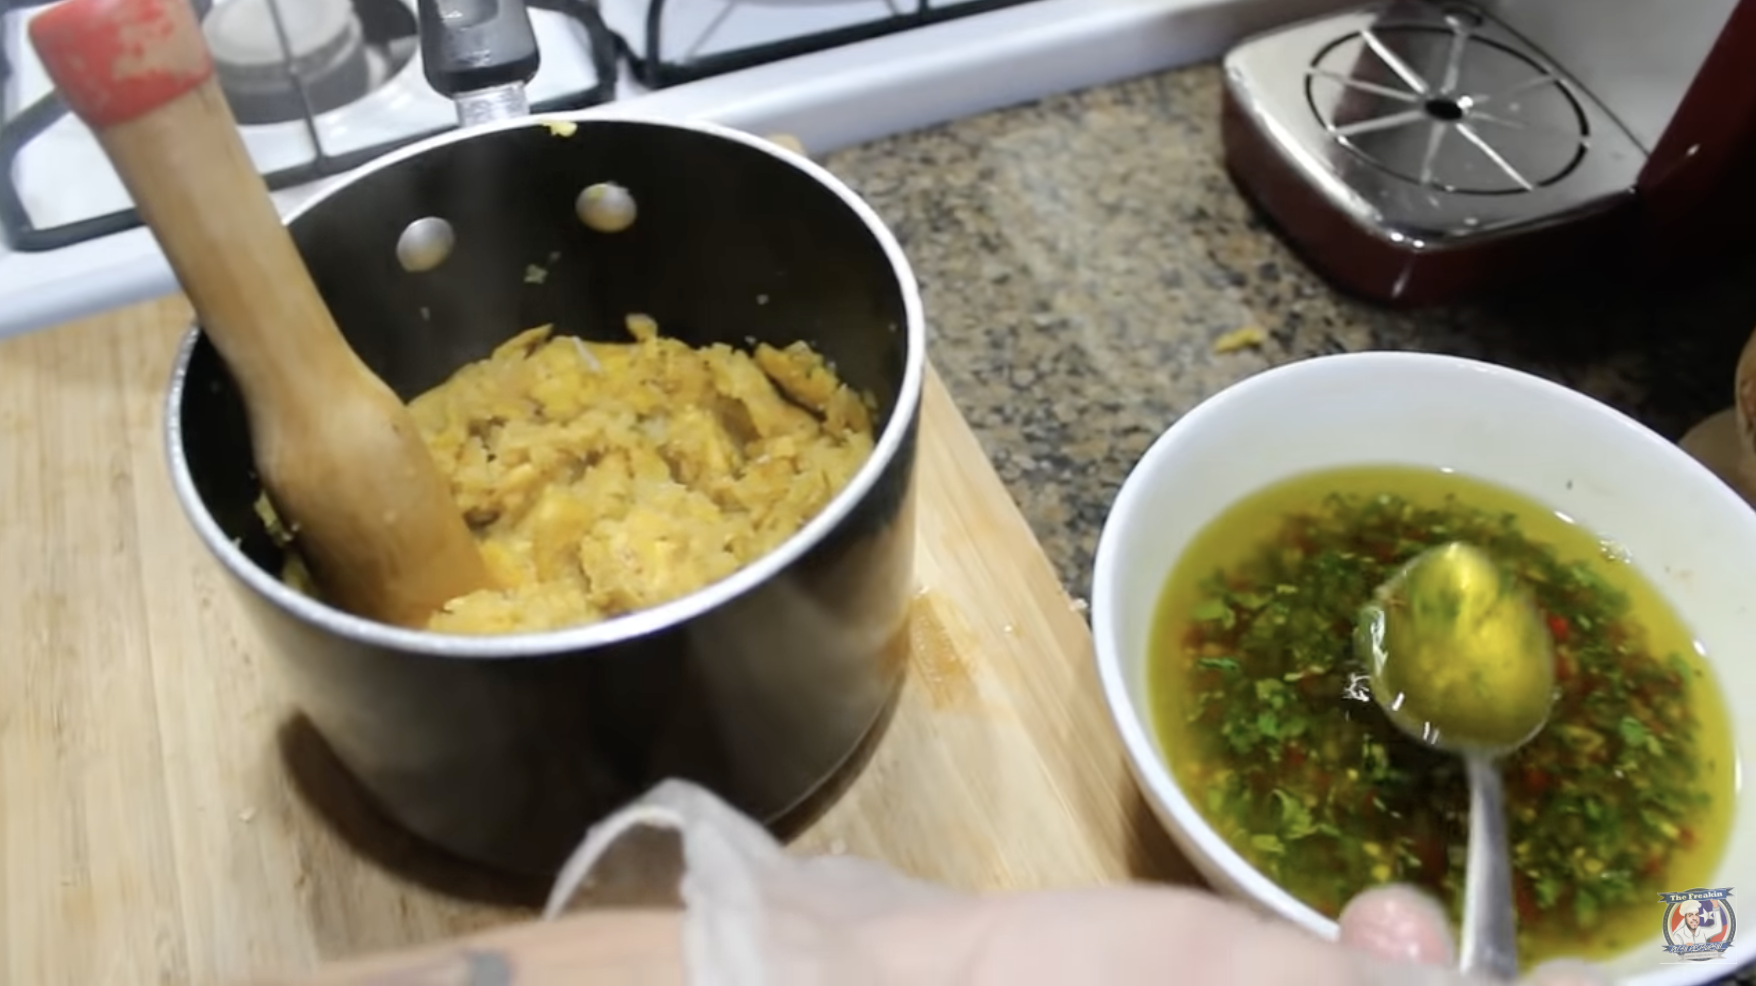 A pot of mofongo mixture and a bowl of seasoned oil next to it